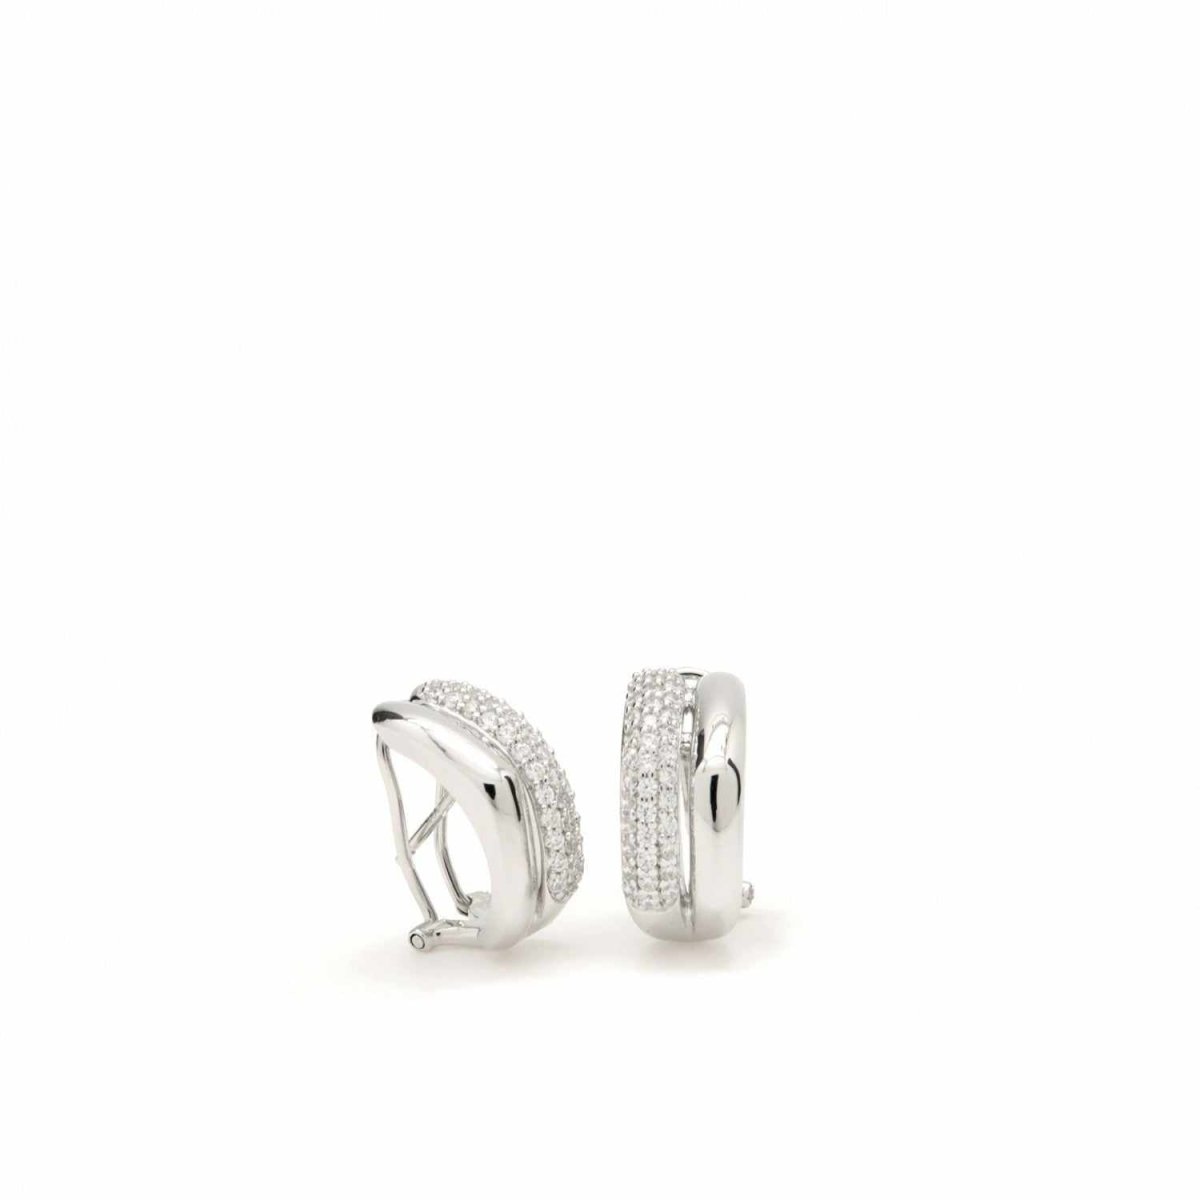 Earrings - Omega clasp earrings with zirconia two-rail design